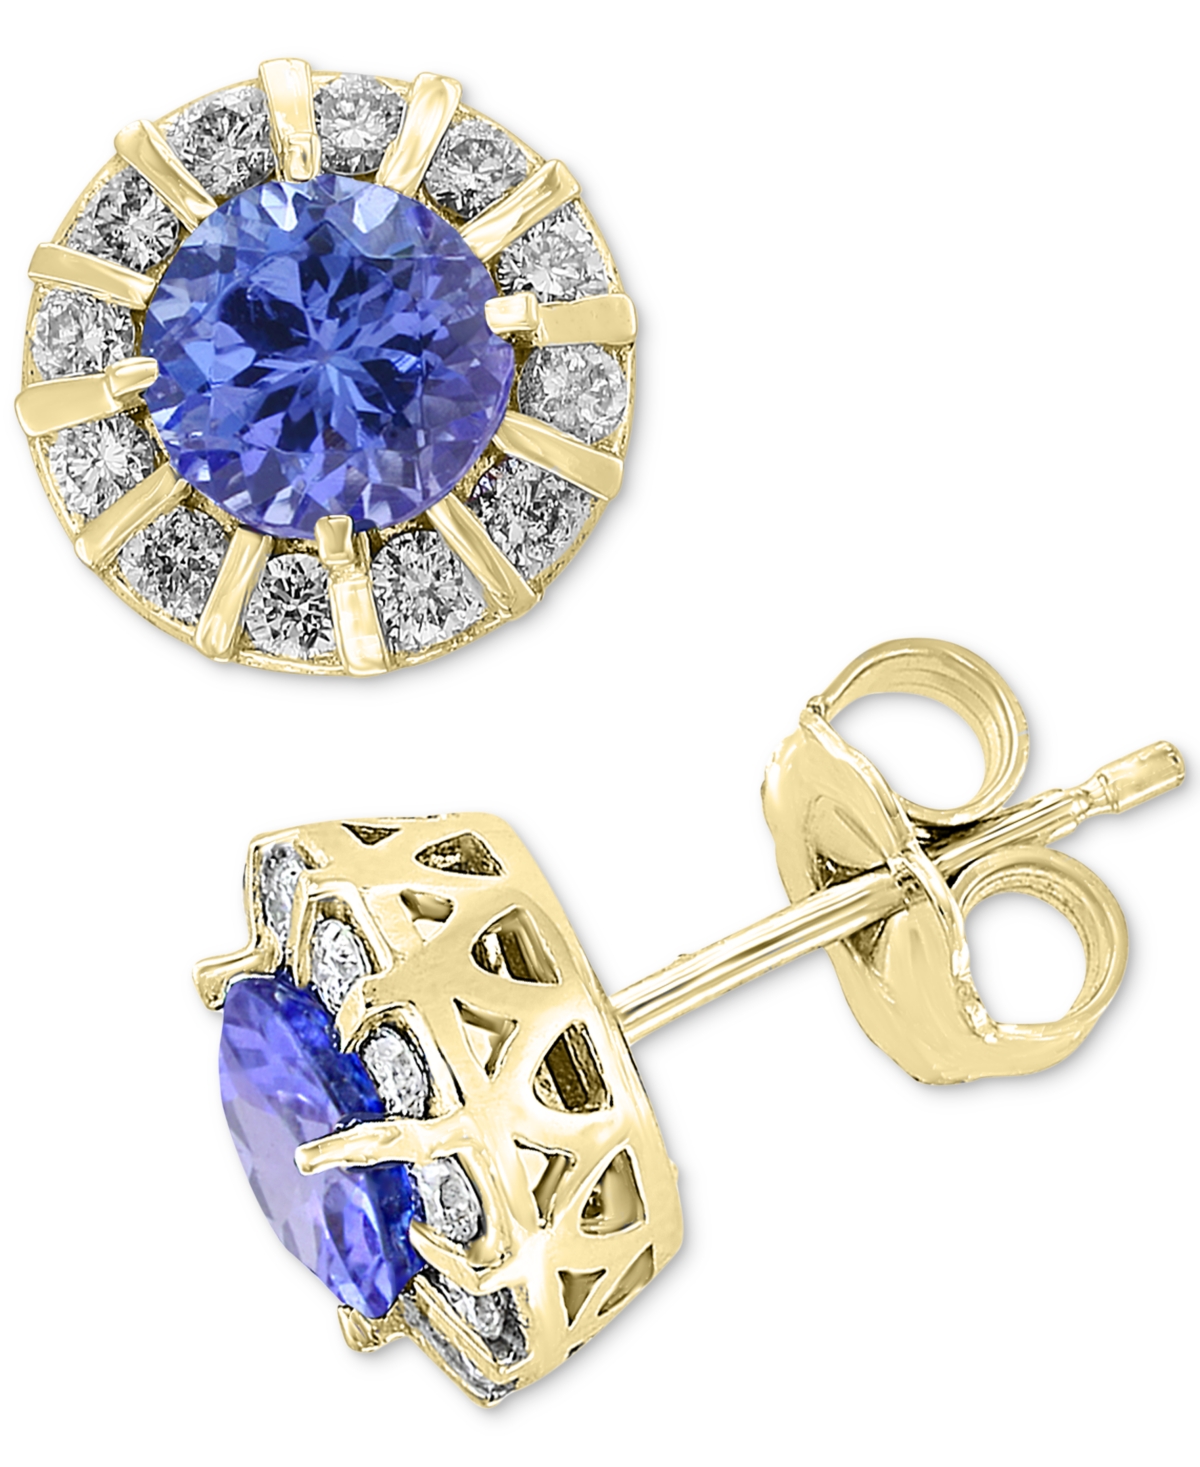 Effy Tanzanite (9/10 ct. t.w.) & Diamond (1/3 ct. t.w.) Stud Earrings in 14k White Gold (Also available in Ruby, Emerald & Sapphire) - Tanzanite/k Yel